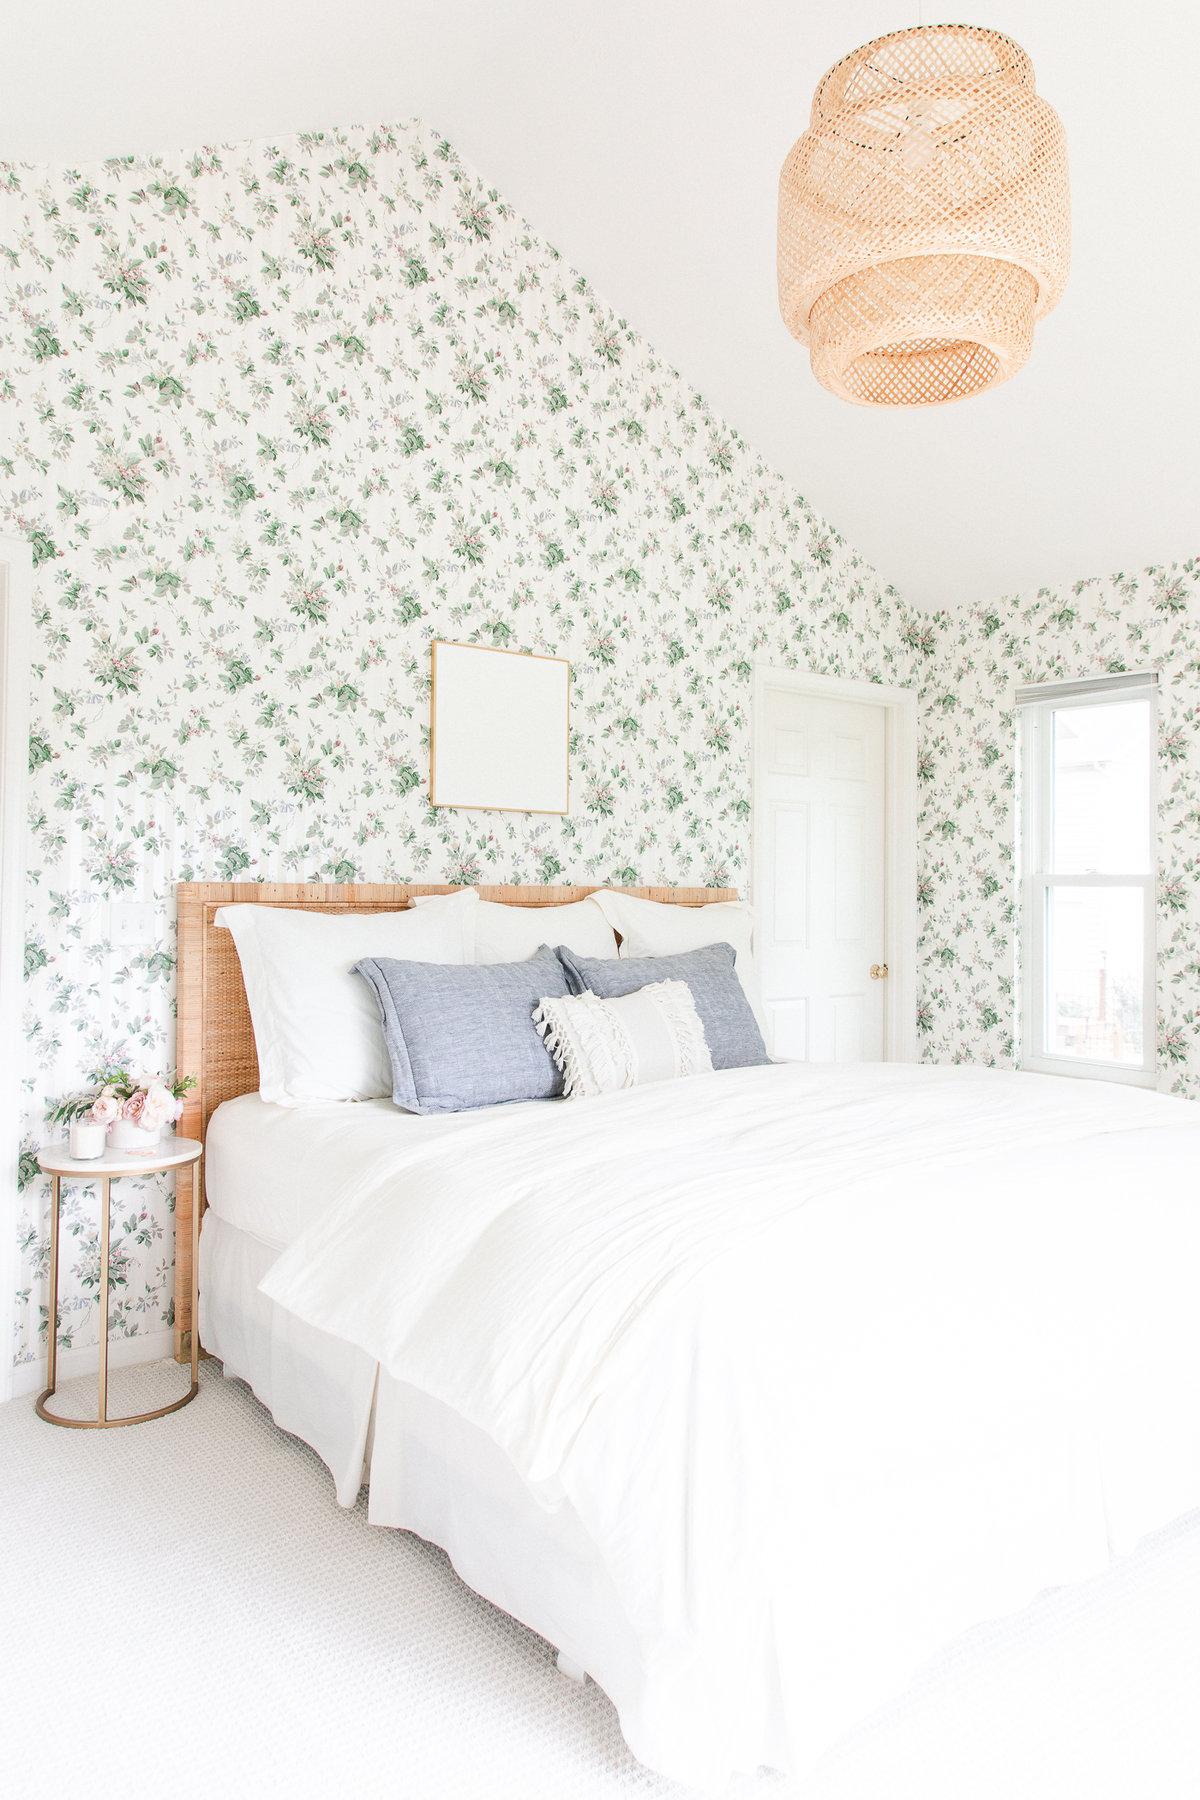 a bedroom with floral wallpaper and white bedroom and minimalist decor.